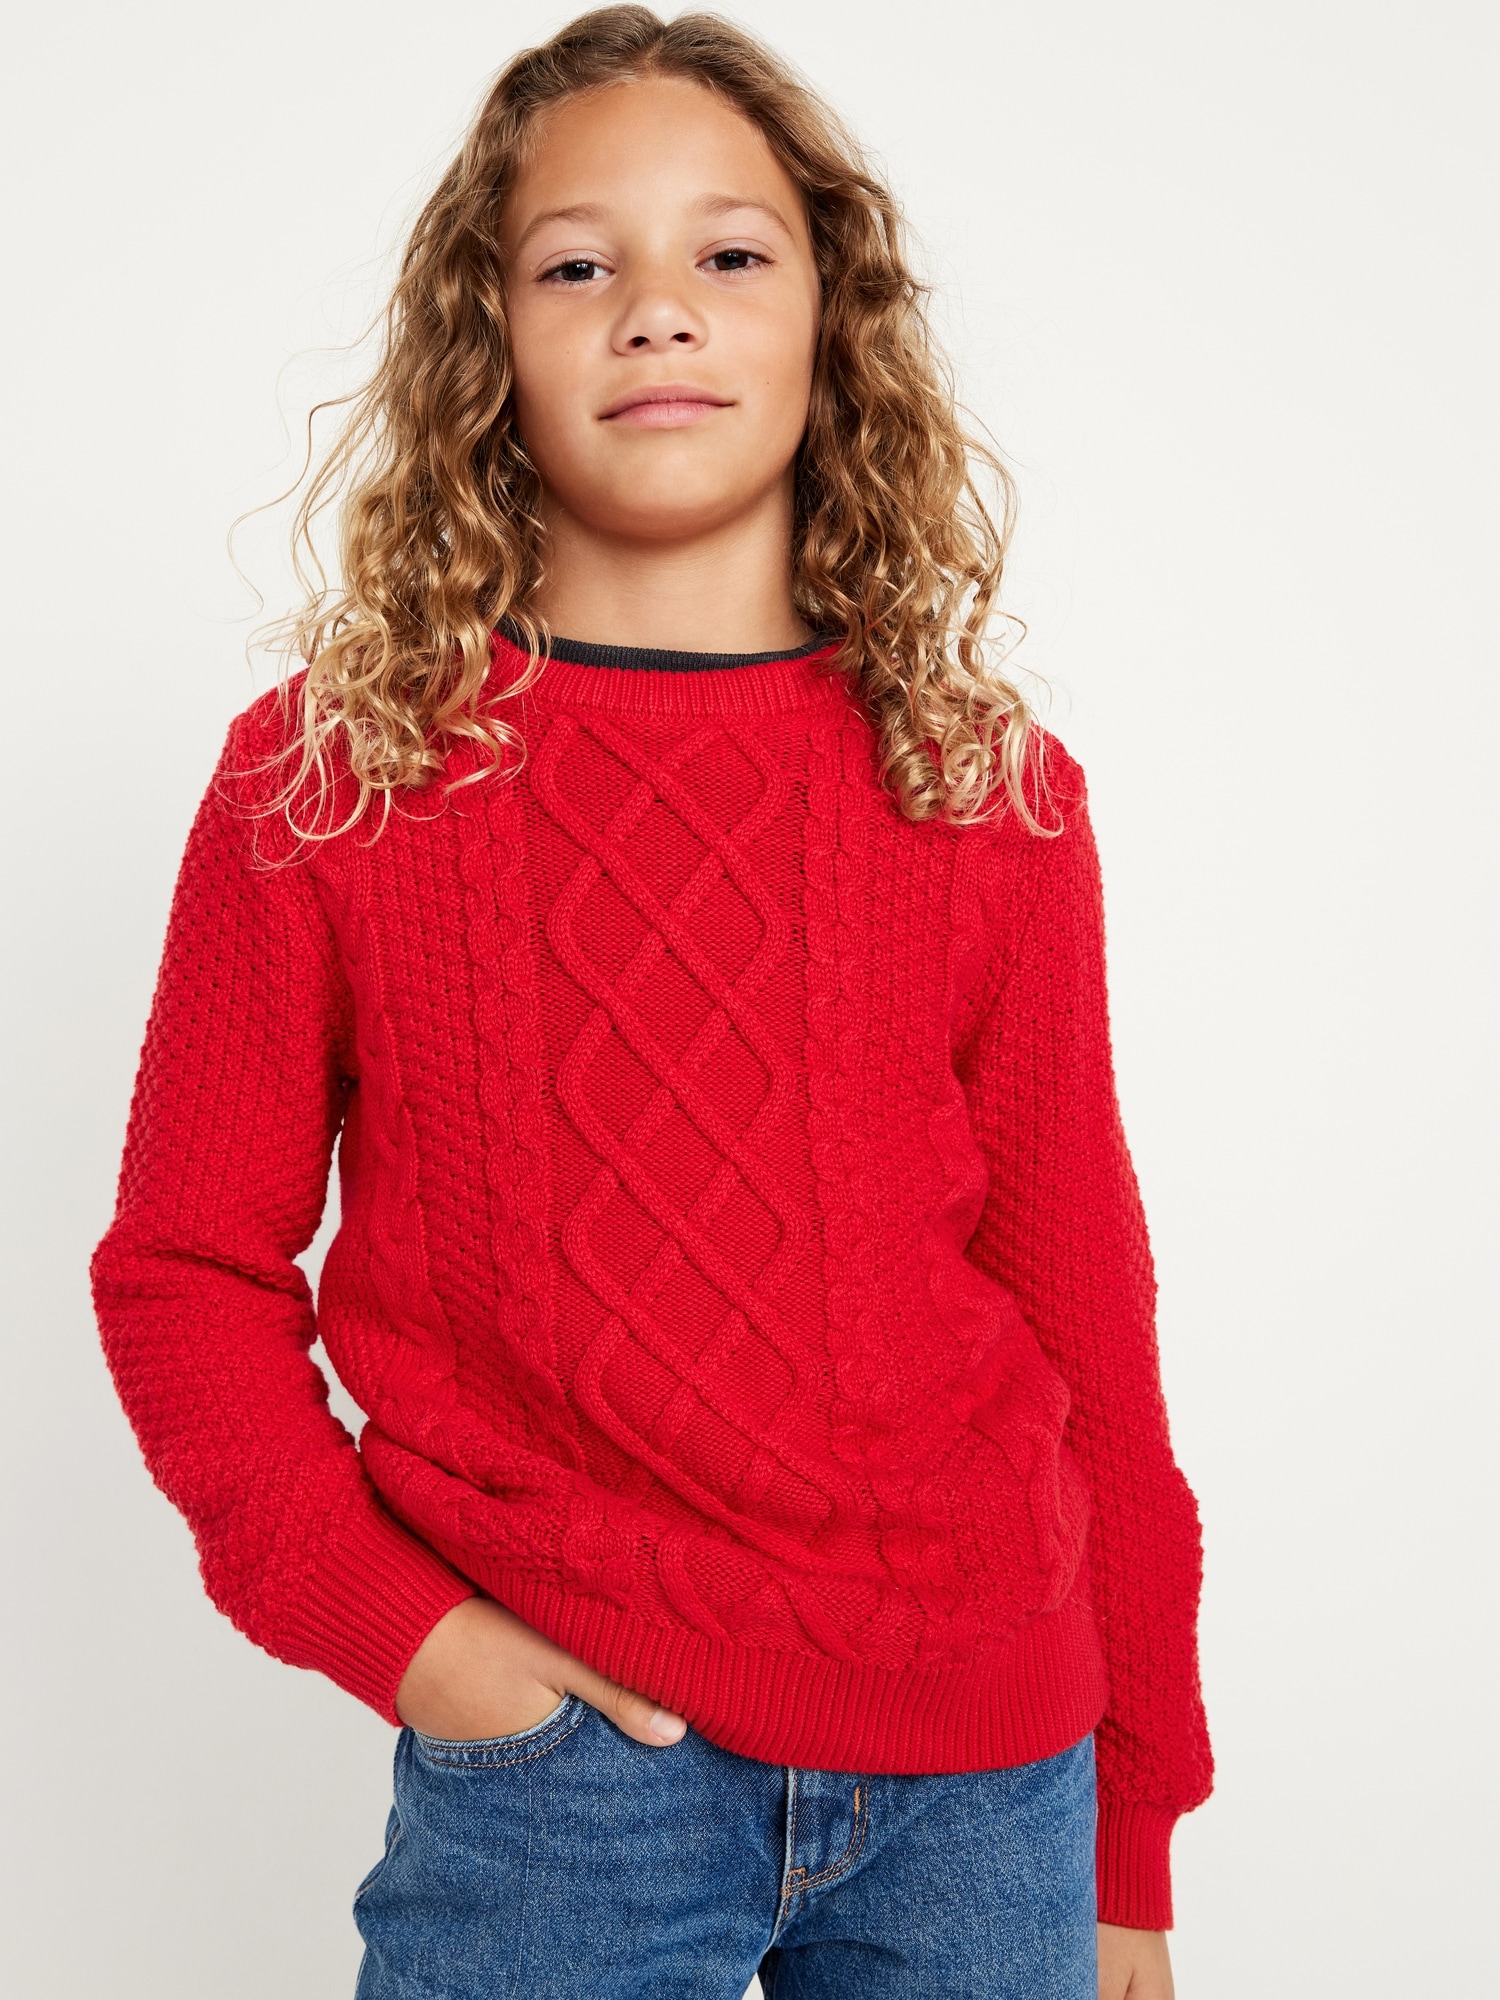 Long-Sleeve Cable-Knit Crew Neck Sweater for Boys